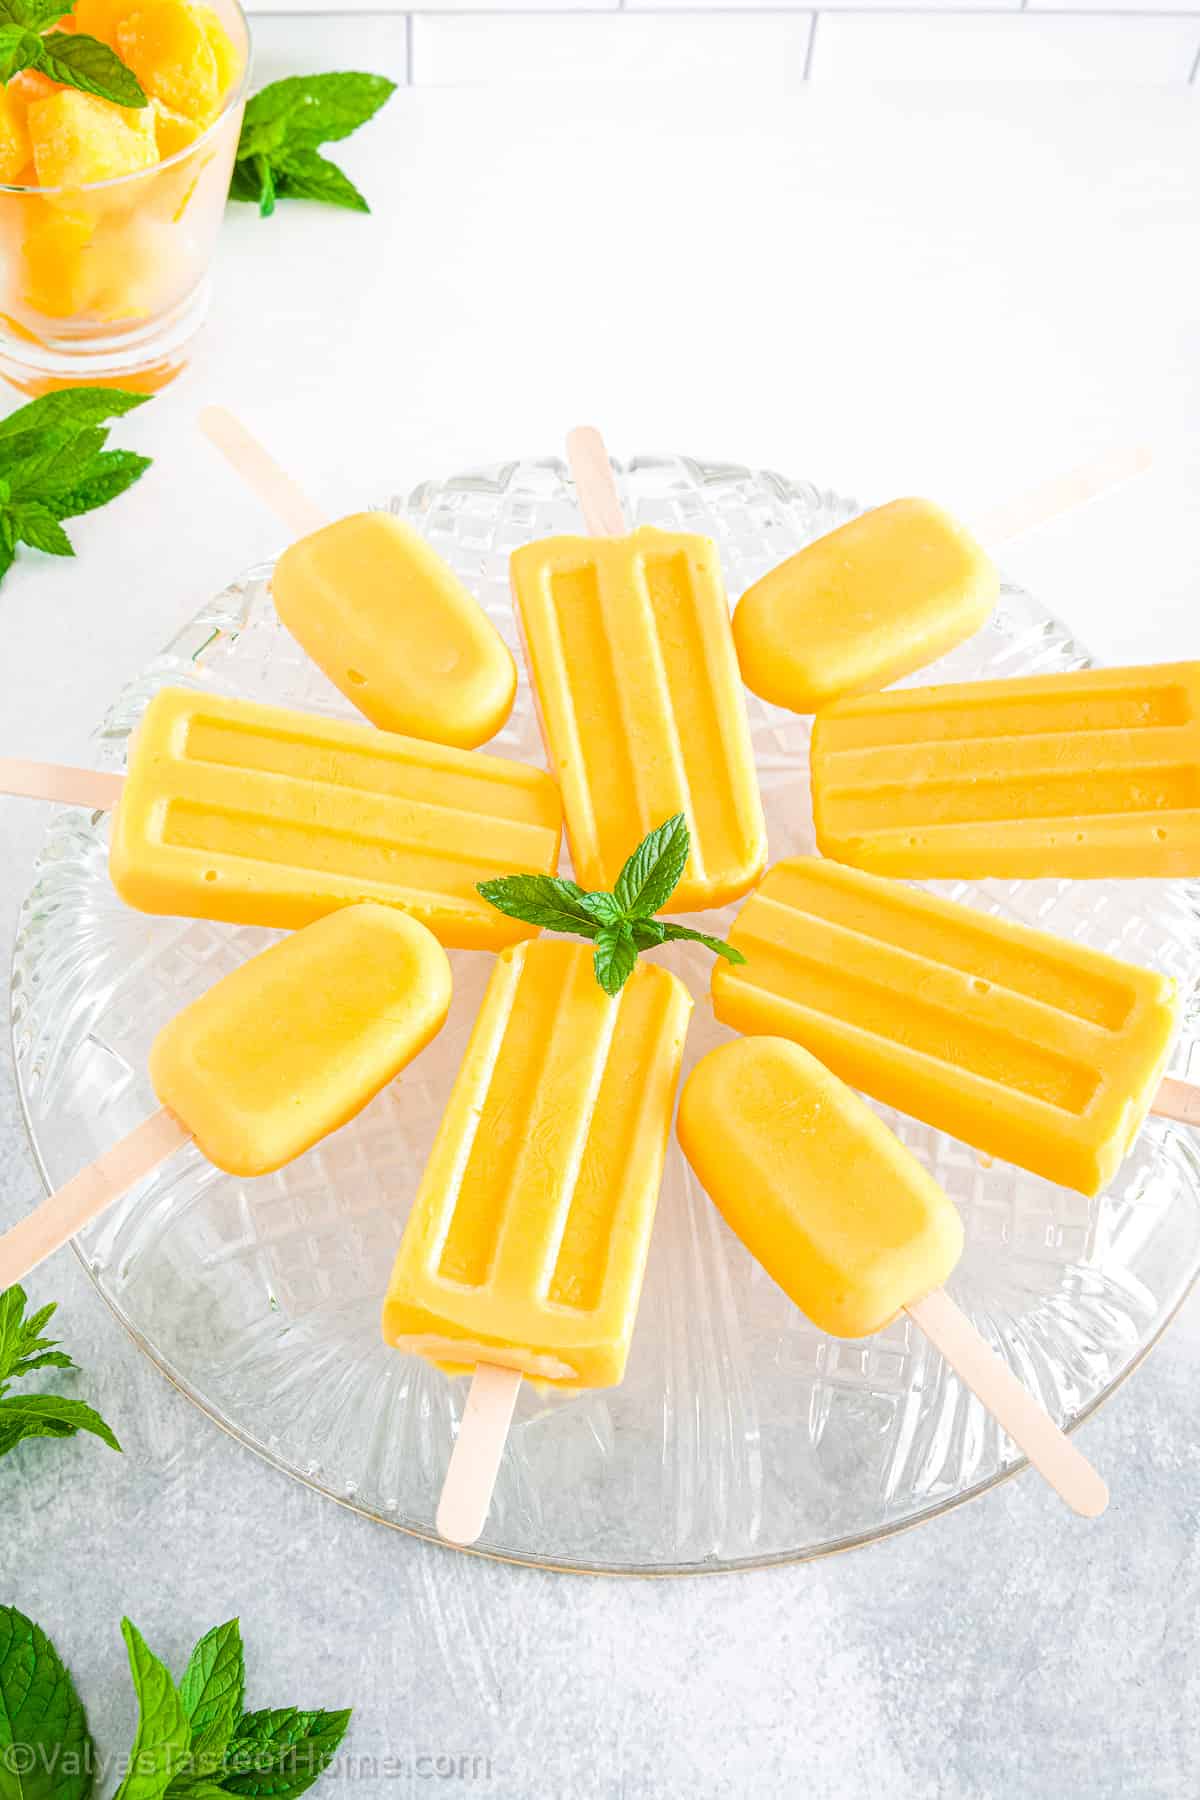 These mango popsicles are the perfect way to beat the summer heat and satisfy your cravings for something cool and fruity.